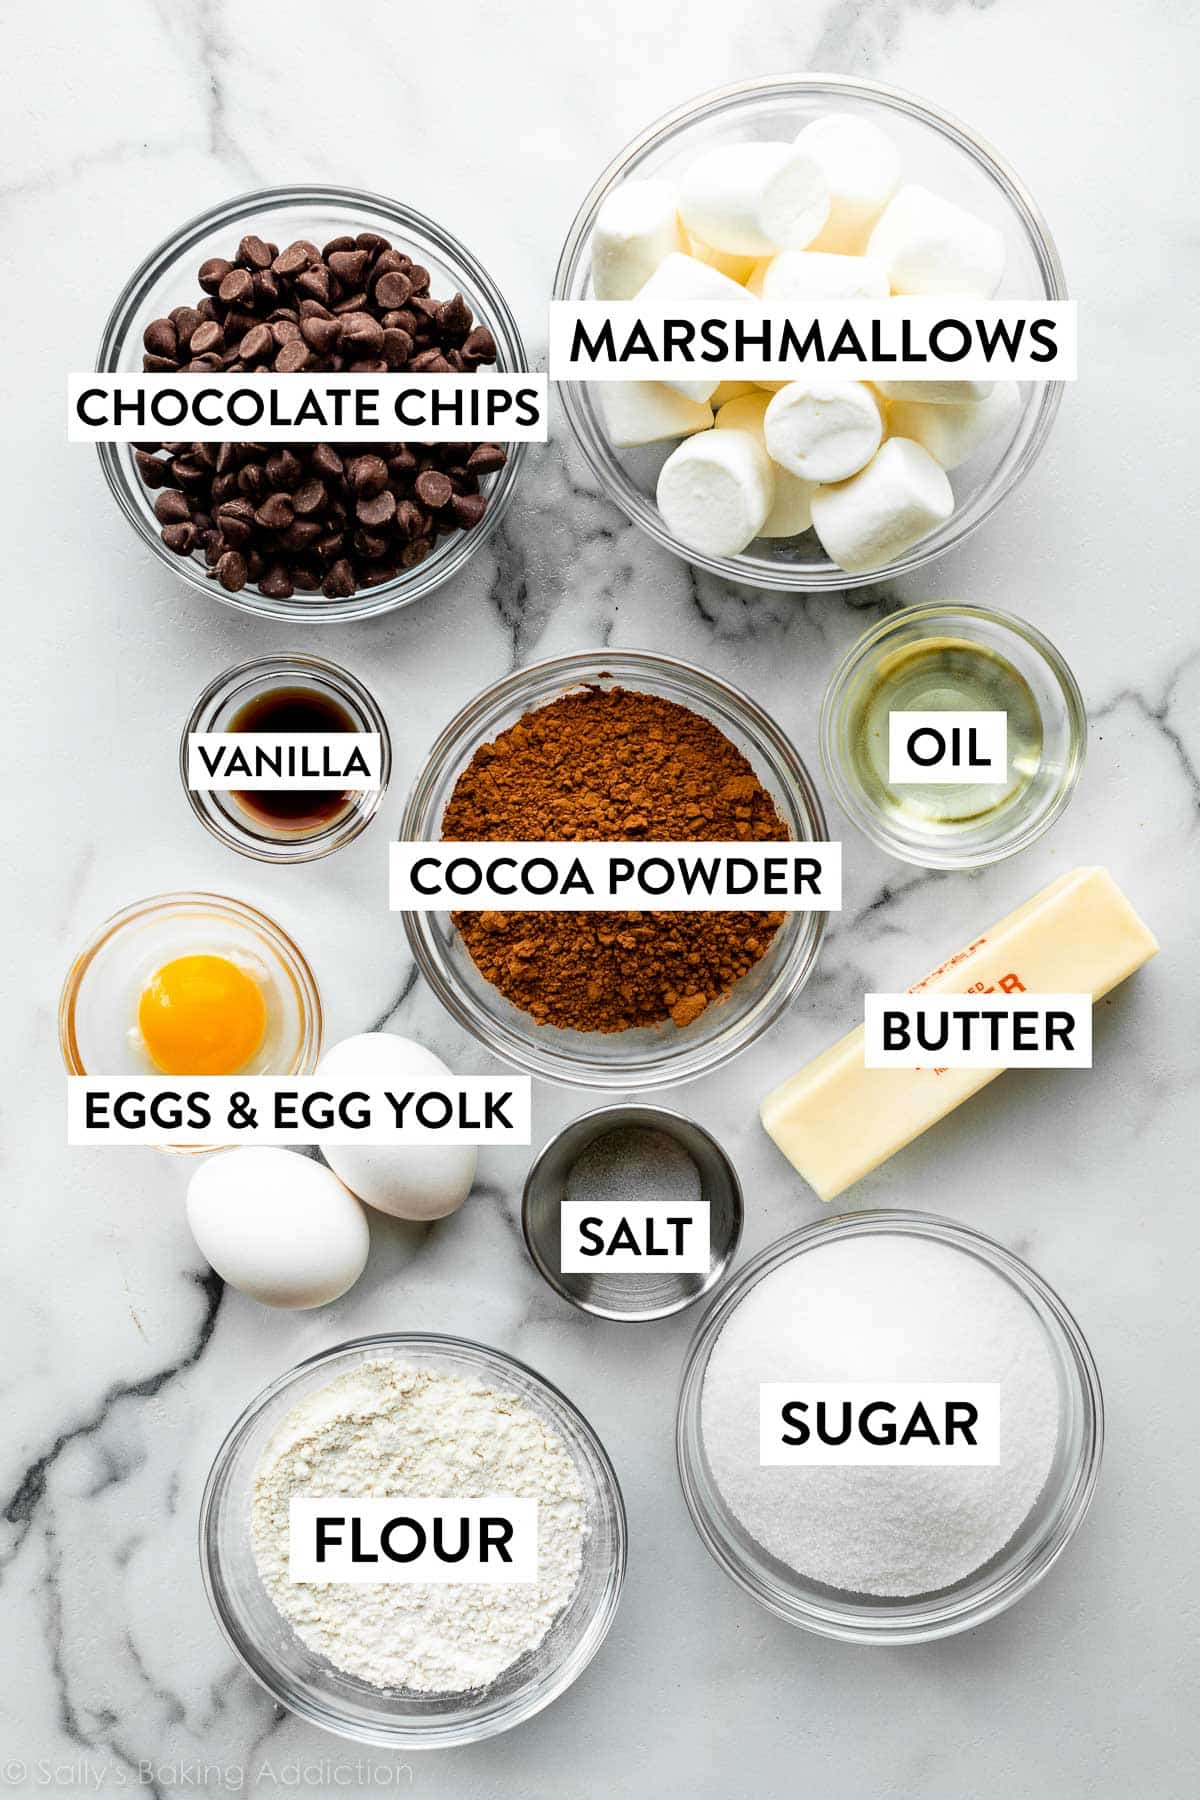 ingredients on marble counter including cocoa powder, oil, butter, sugar, flour, eggs, and chocolate chips.